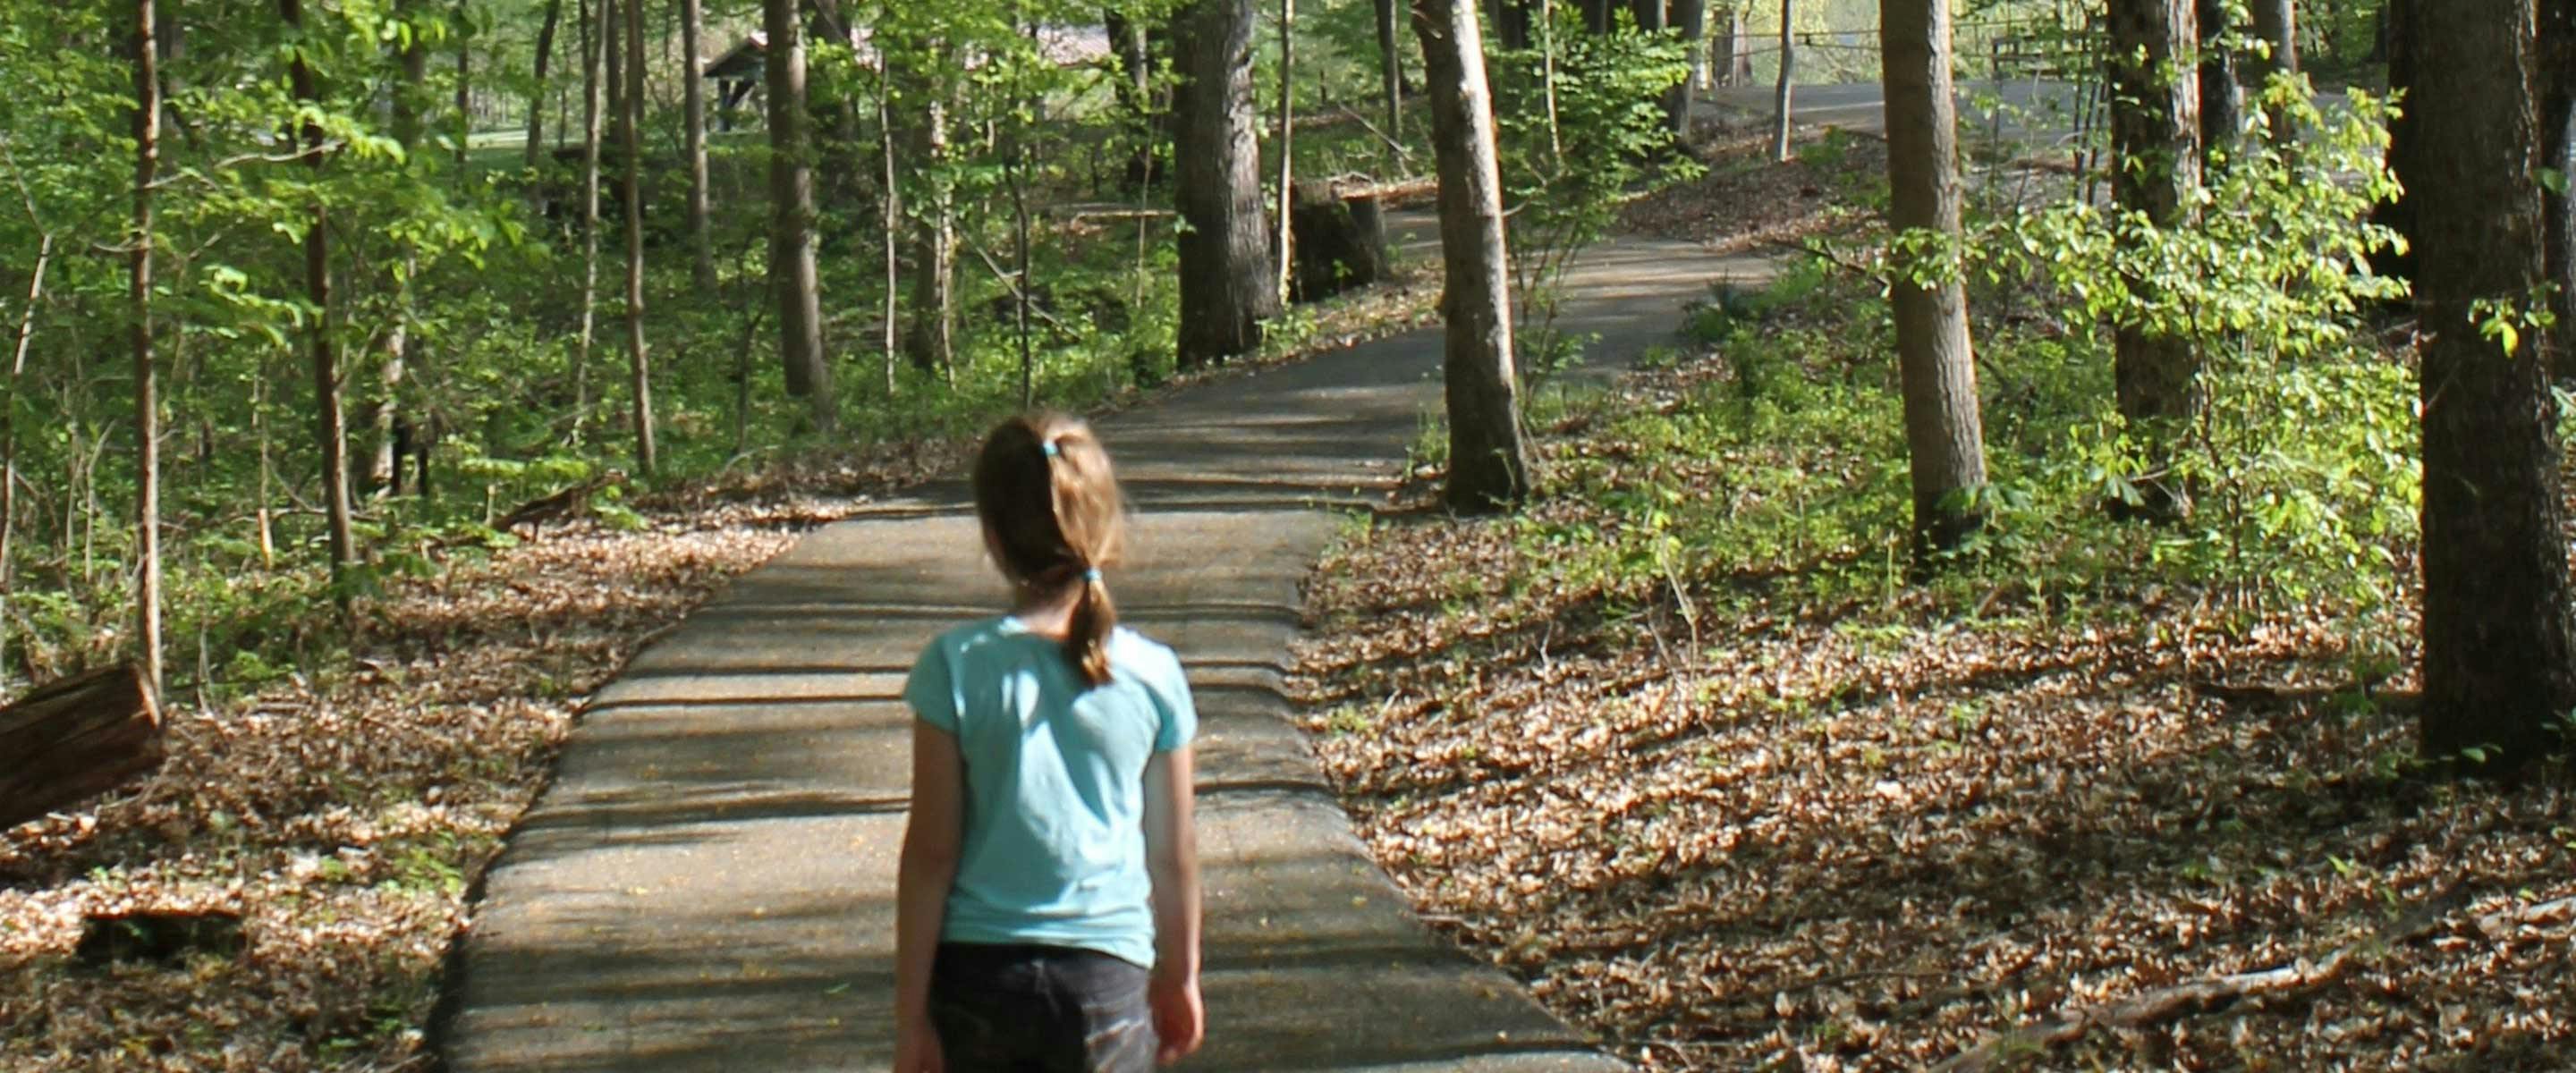 girl walking on paved nature trail to tree forrest canopy area in shade